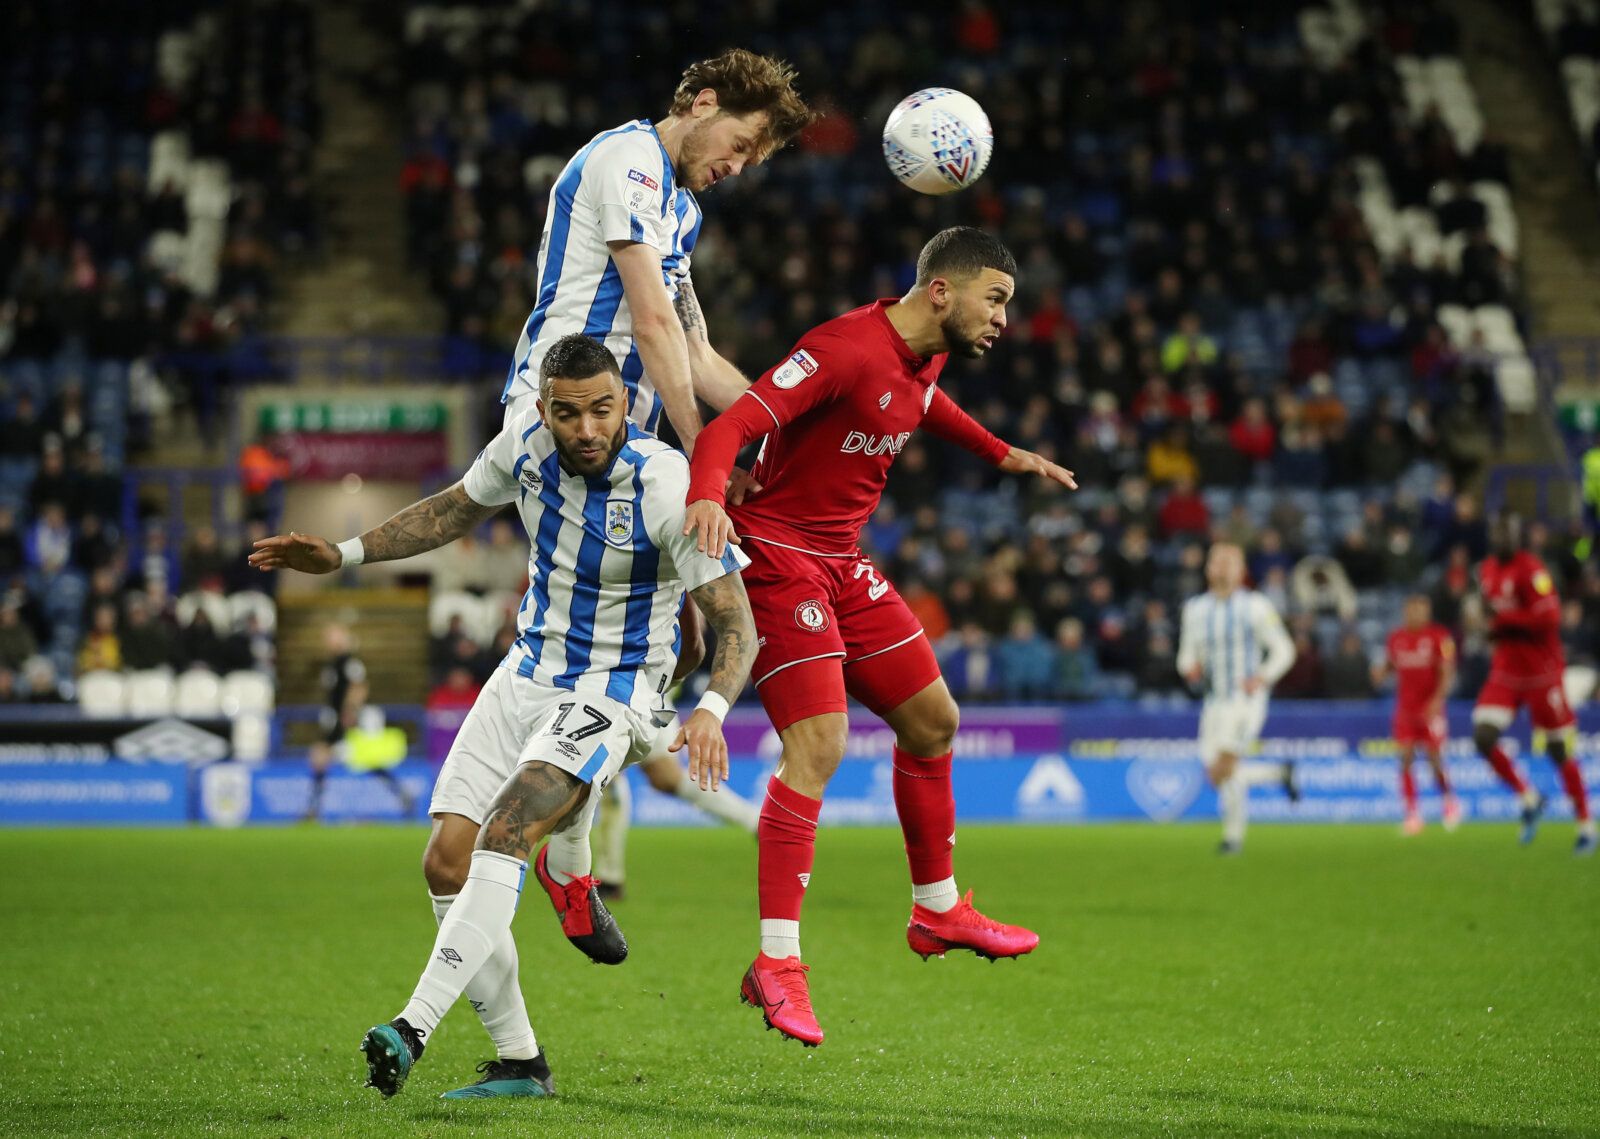 Soccer Football - Championship - Huddersfield Town v Bristol City - John Smith's Stadium, Huddersfield, Britain - February 25, 2020   Bristol City's Nahki Wells in action with Huddersfield Town's Danny Simpson and Richard Stearman   Action Images/Molly Darlington    EDITORIAL USE ONLY. No use with unauthorized audio, video, data, fixture lists, club/league logos or 